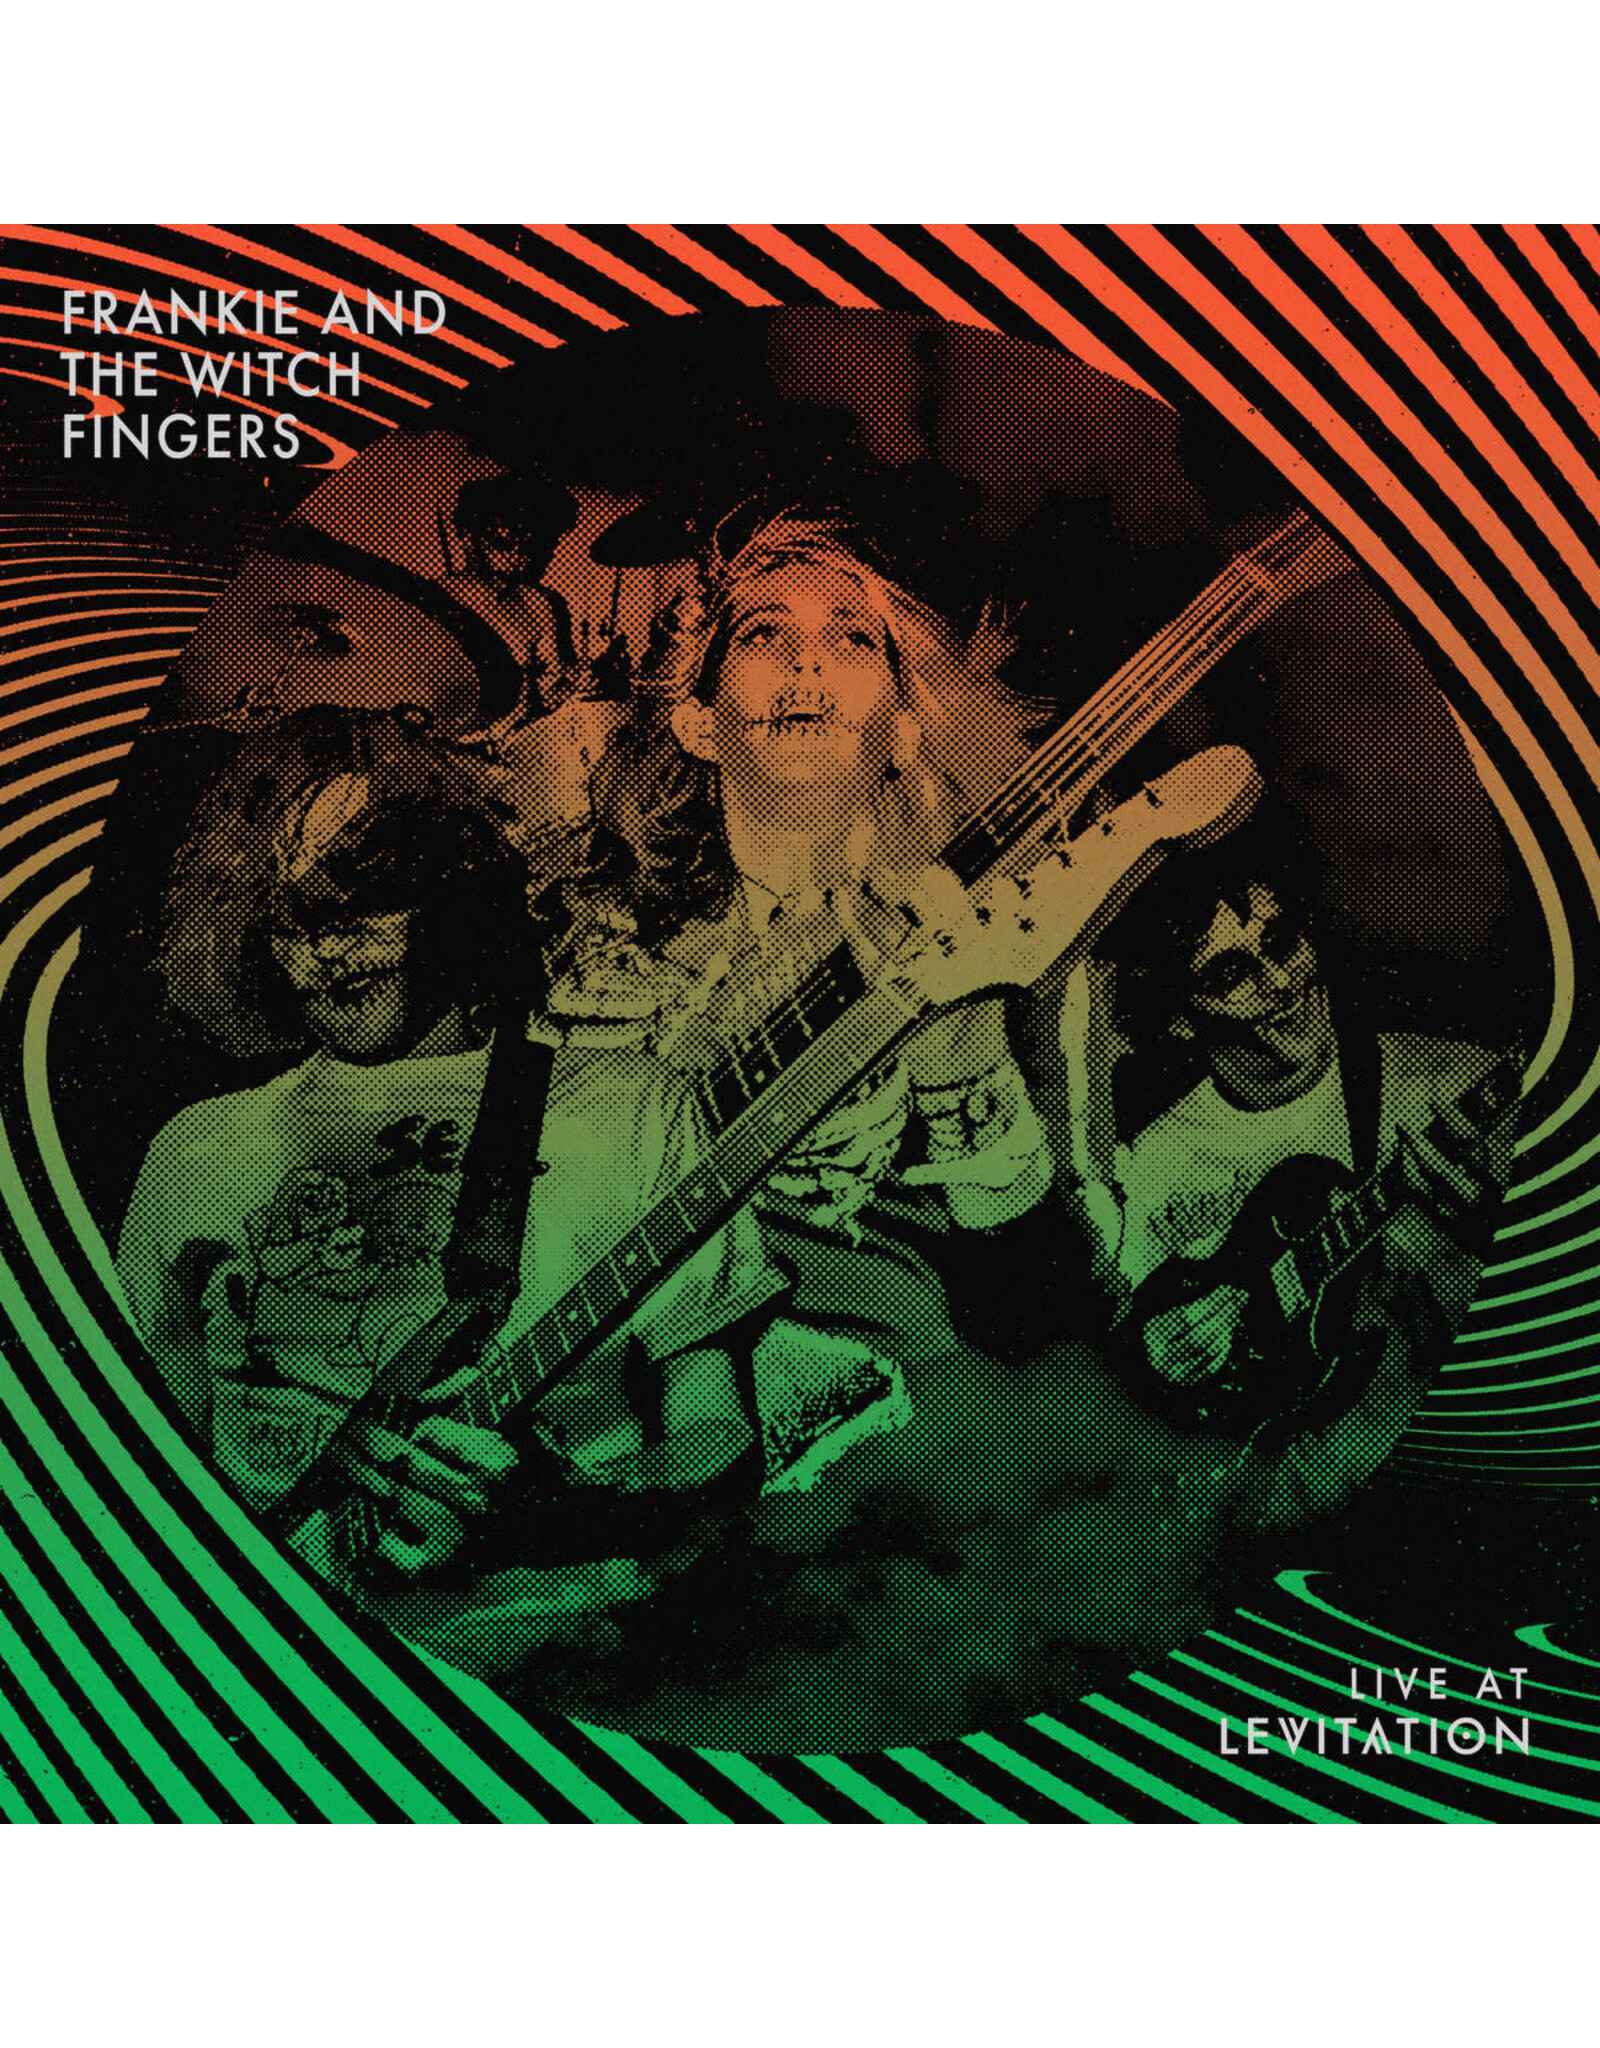 Frankie And The Witch Fingers - Live at LEVITATION (Record Store Day) [Splatter Vinyl]